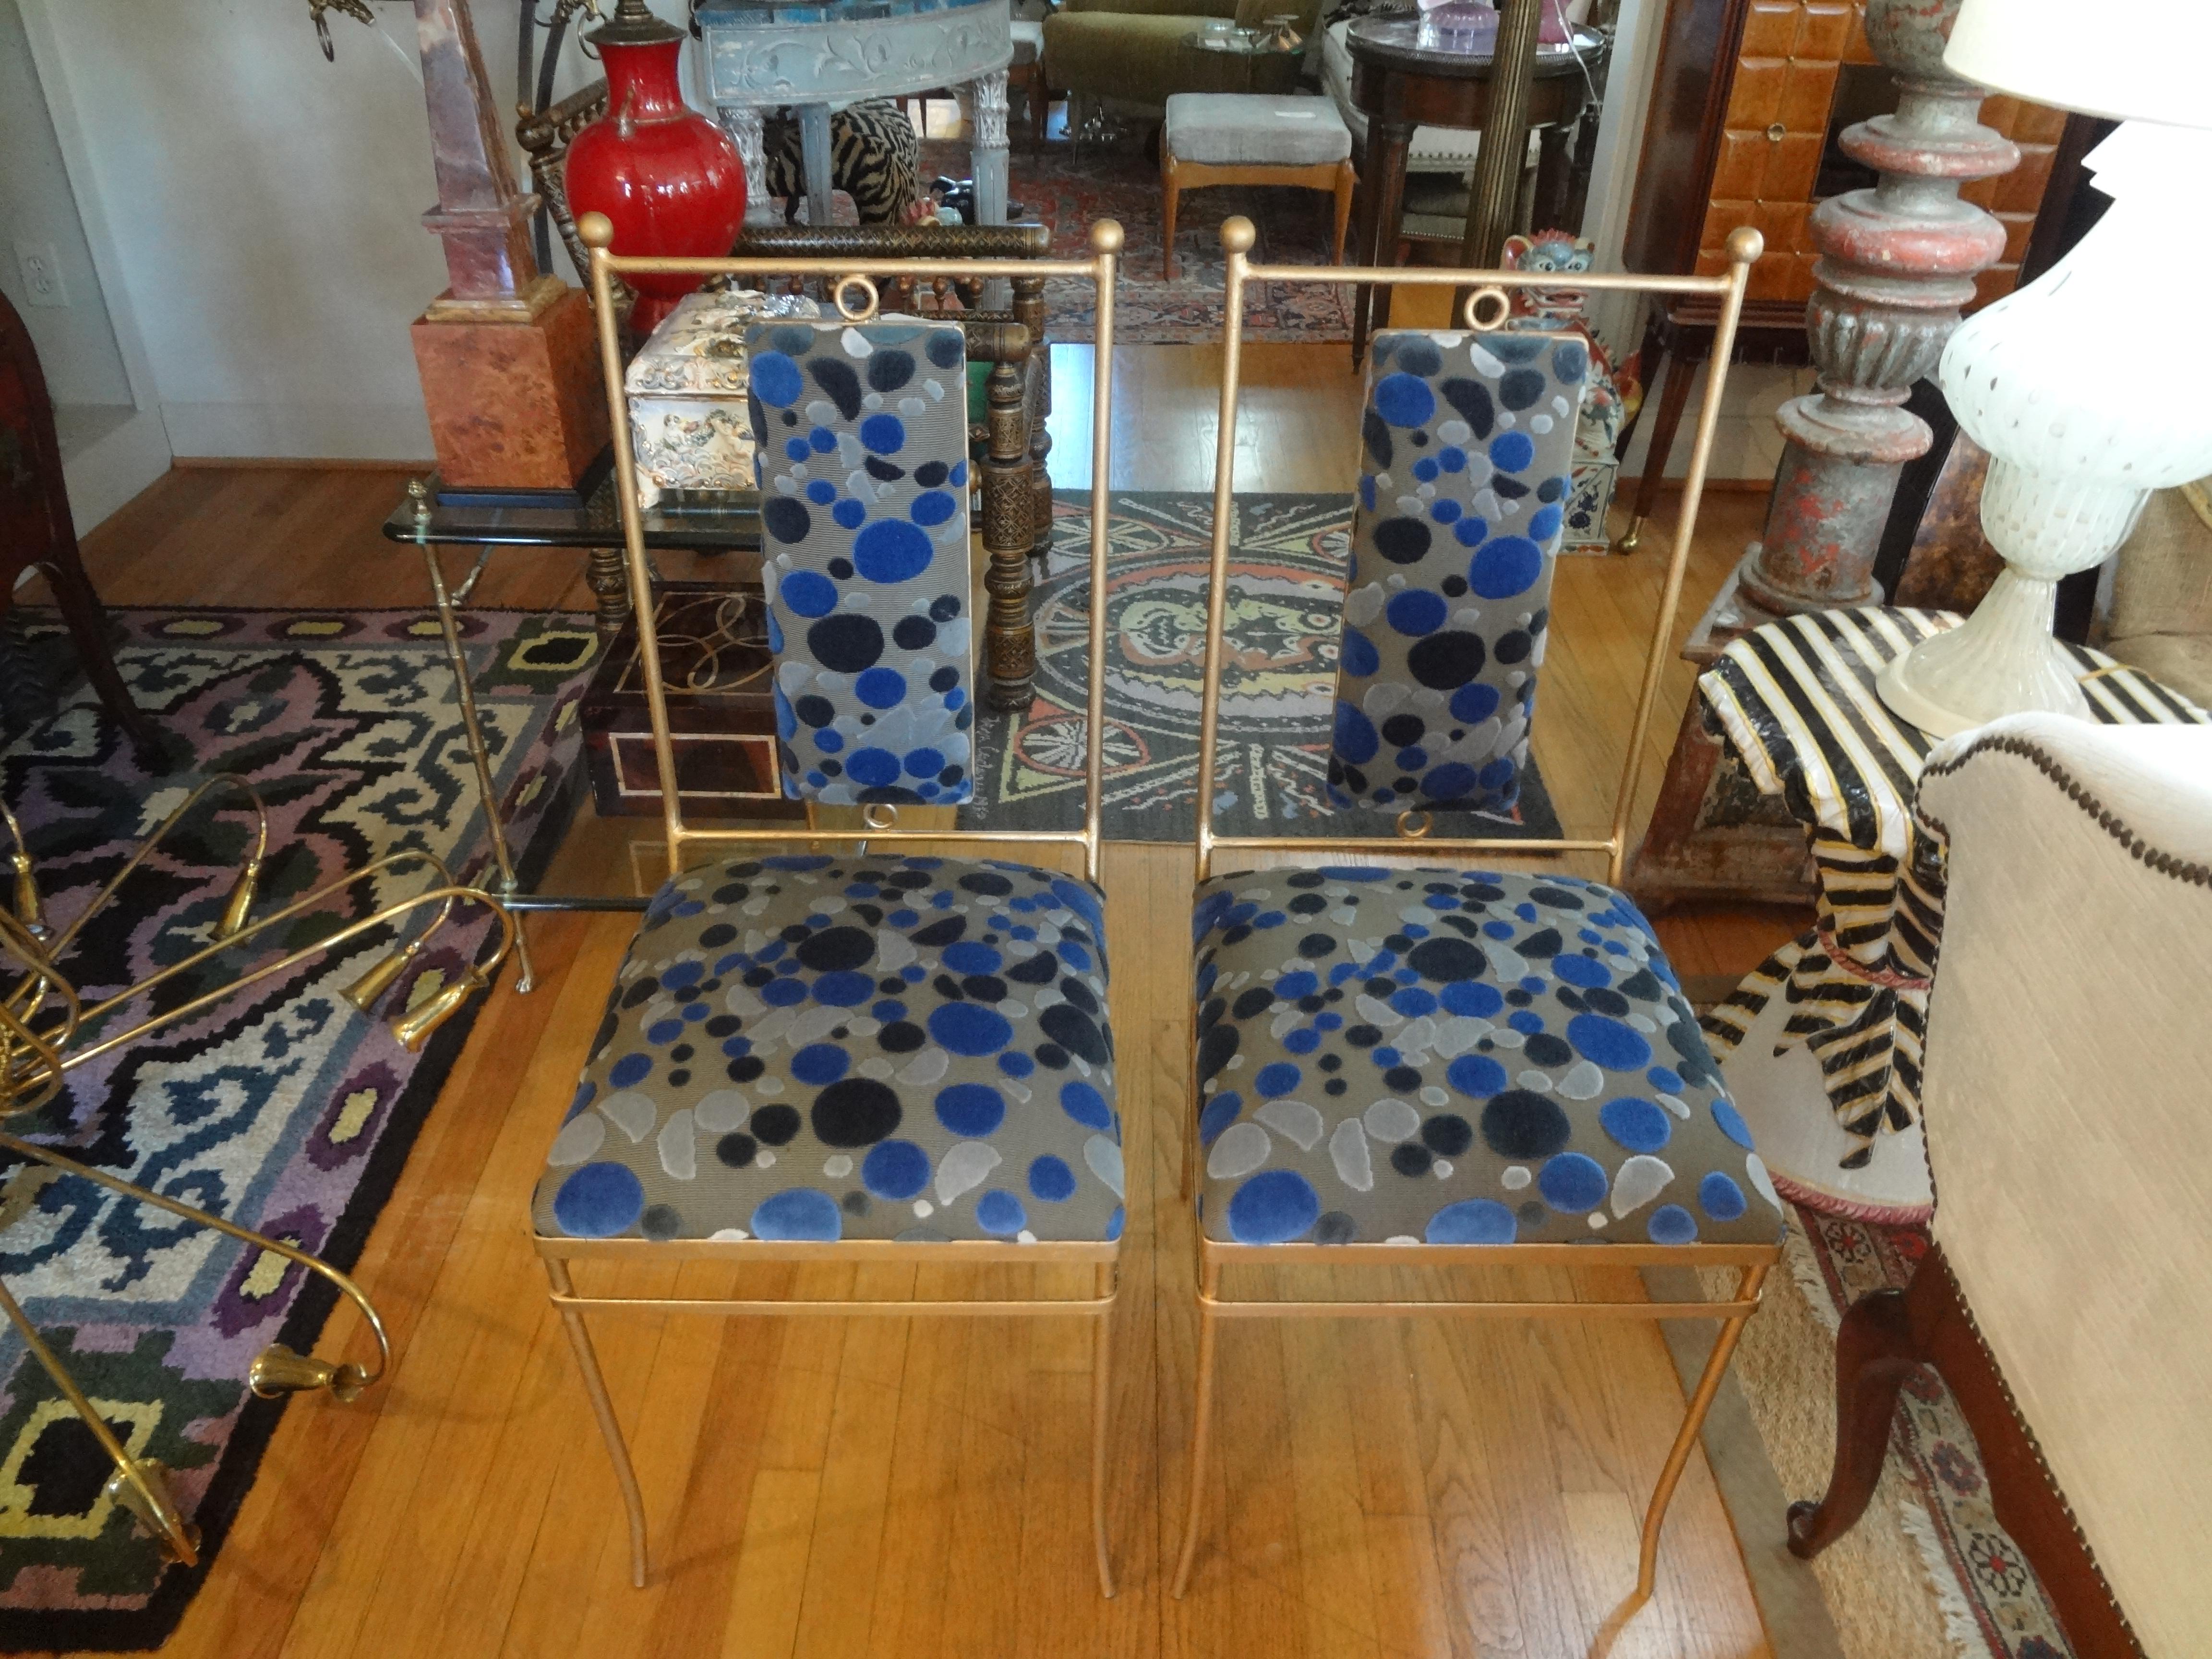 Stunning pair of Italian midcentury neoclassical style gilt iron chairs professionally upholstered in a designer cut velvet fabric. This pair of versatile Italian gilt wrought iron side chairs will work in a variety of design themes and rooms.